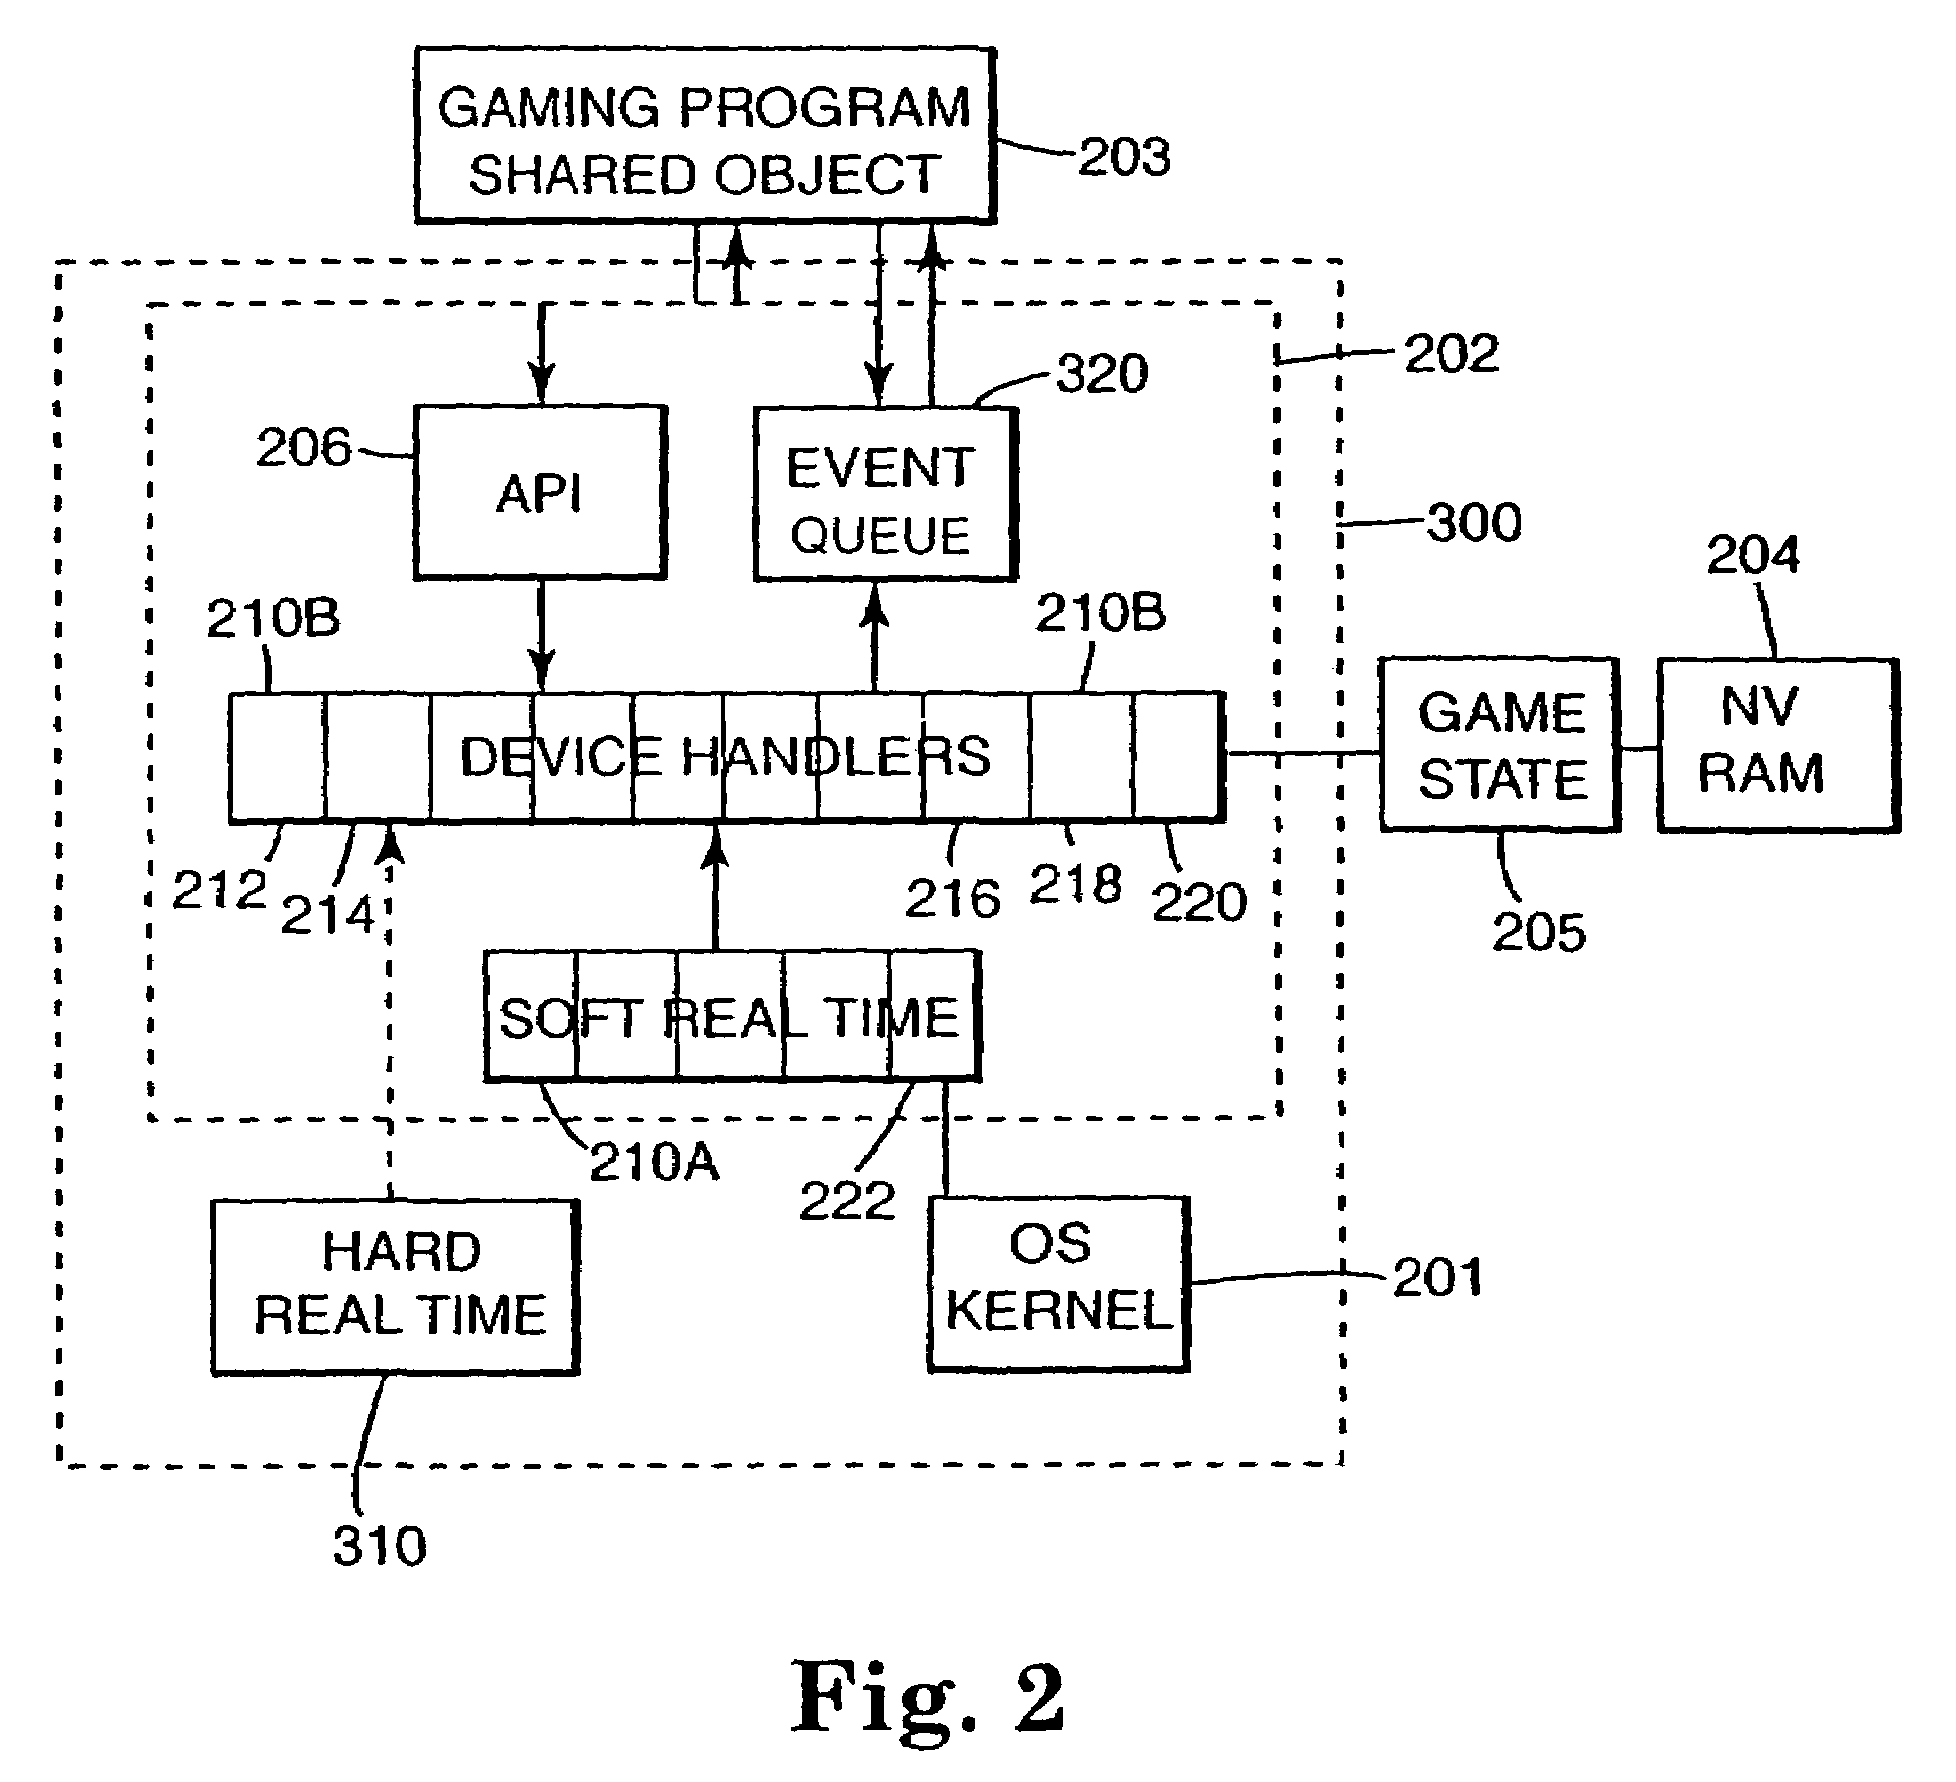 Method for developing gaming programs compatible with a computerized gaming operating system and apparatus